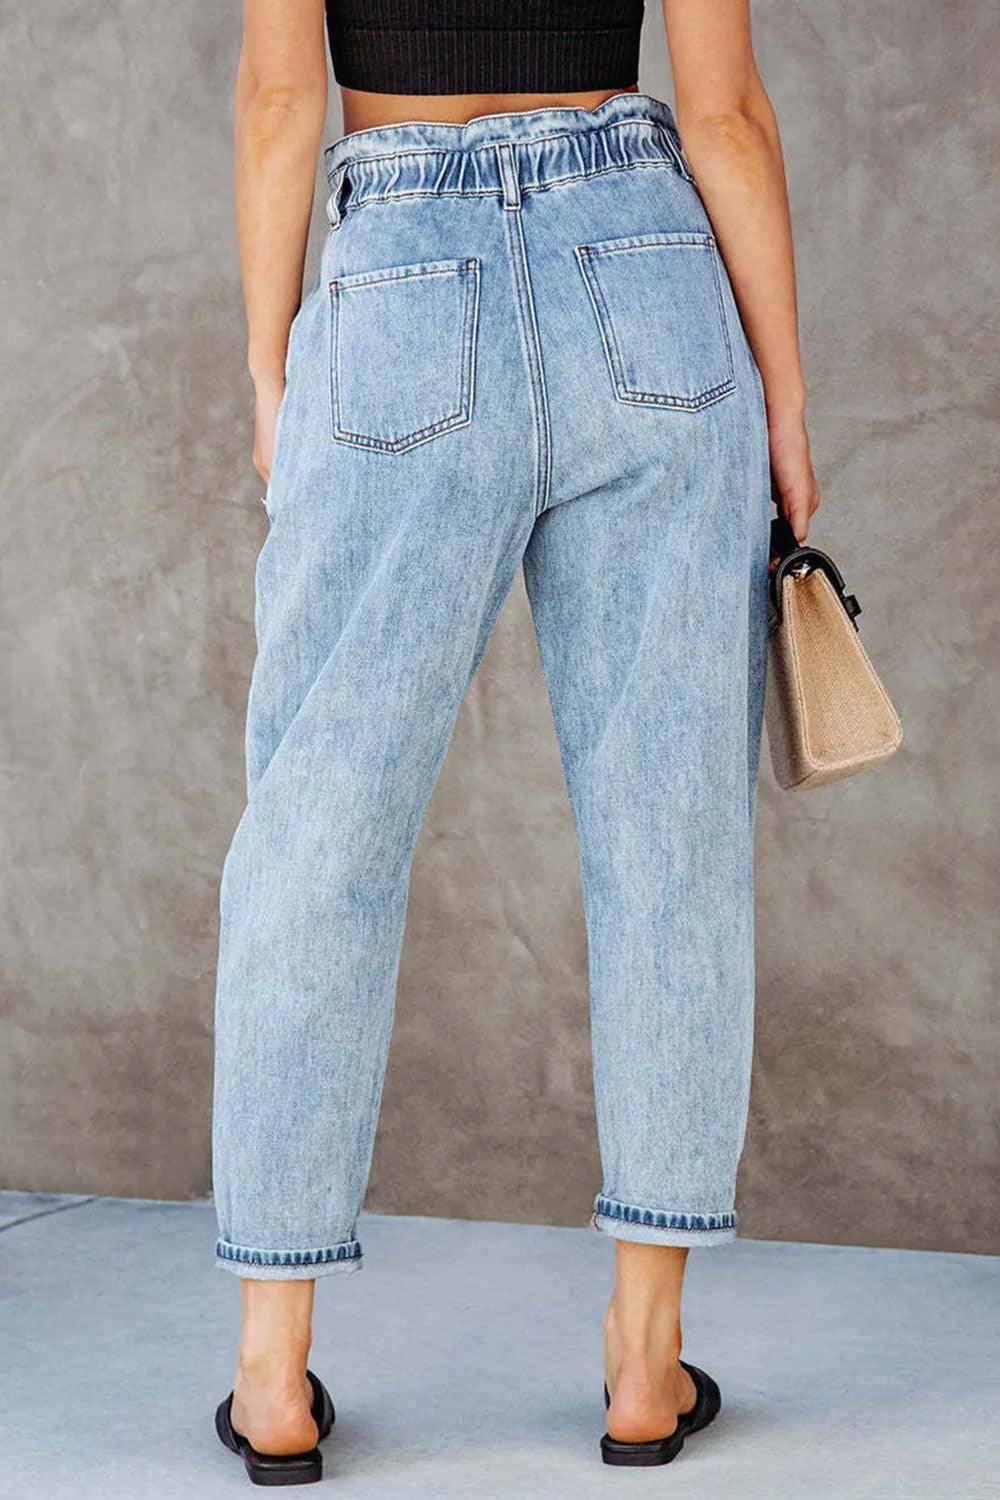 Paperbag Waist Cropped Jeans on Sale - Daily Fashion